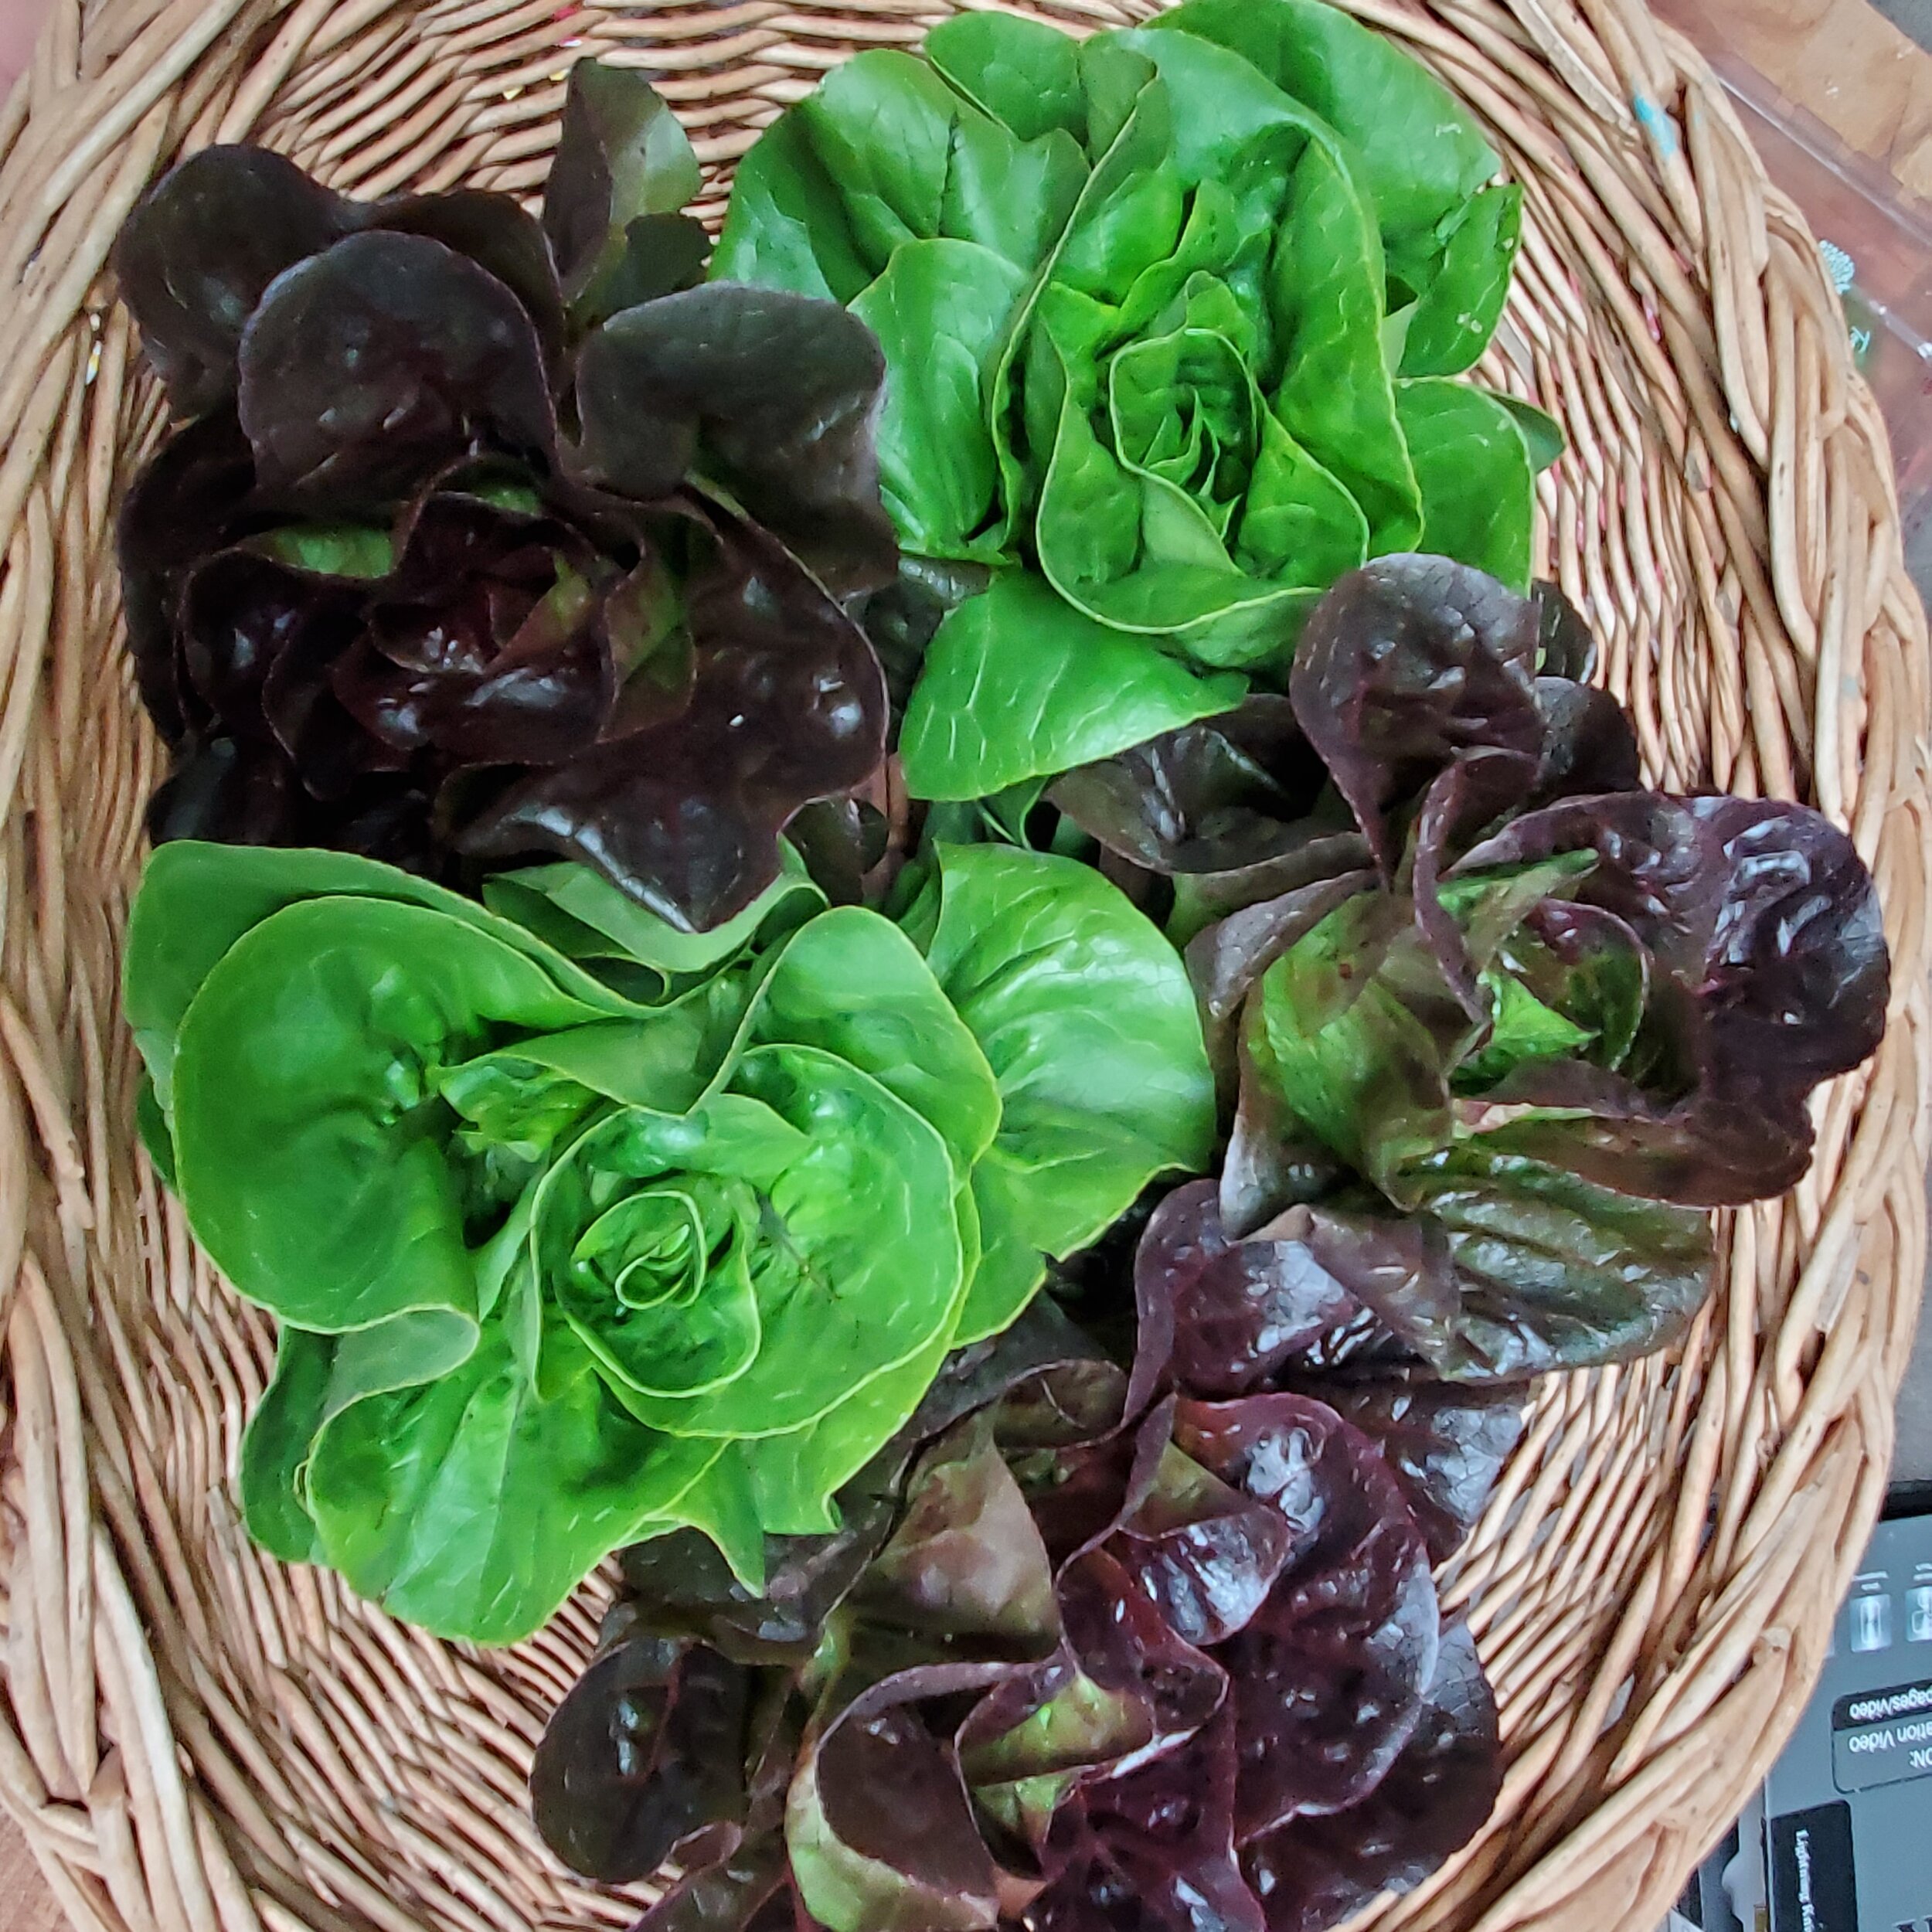  Gem lettuces. We sell them as a colourful trio in our online store. 